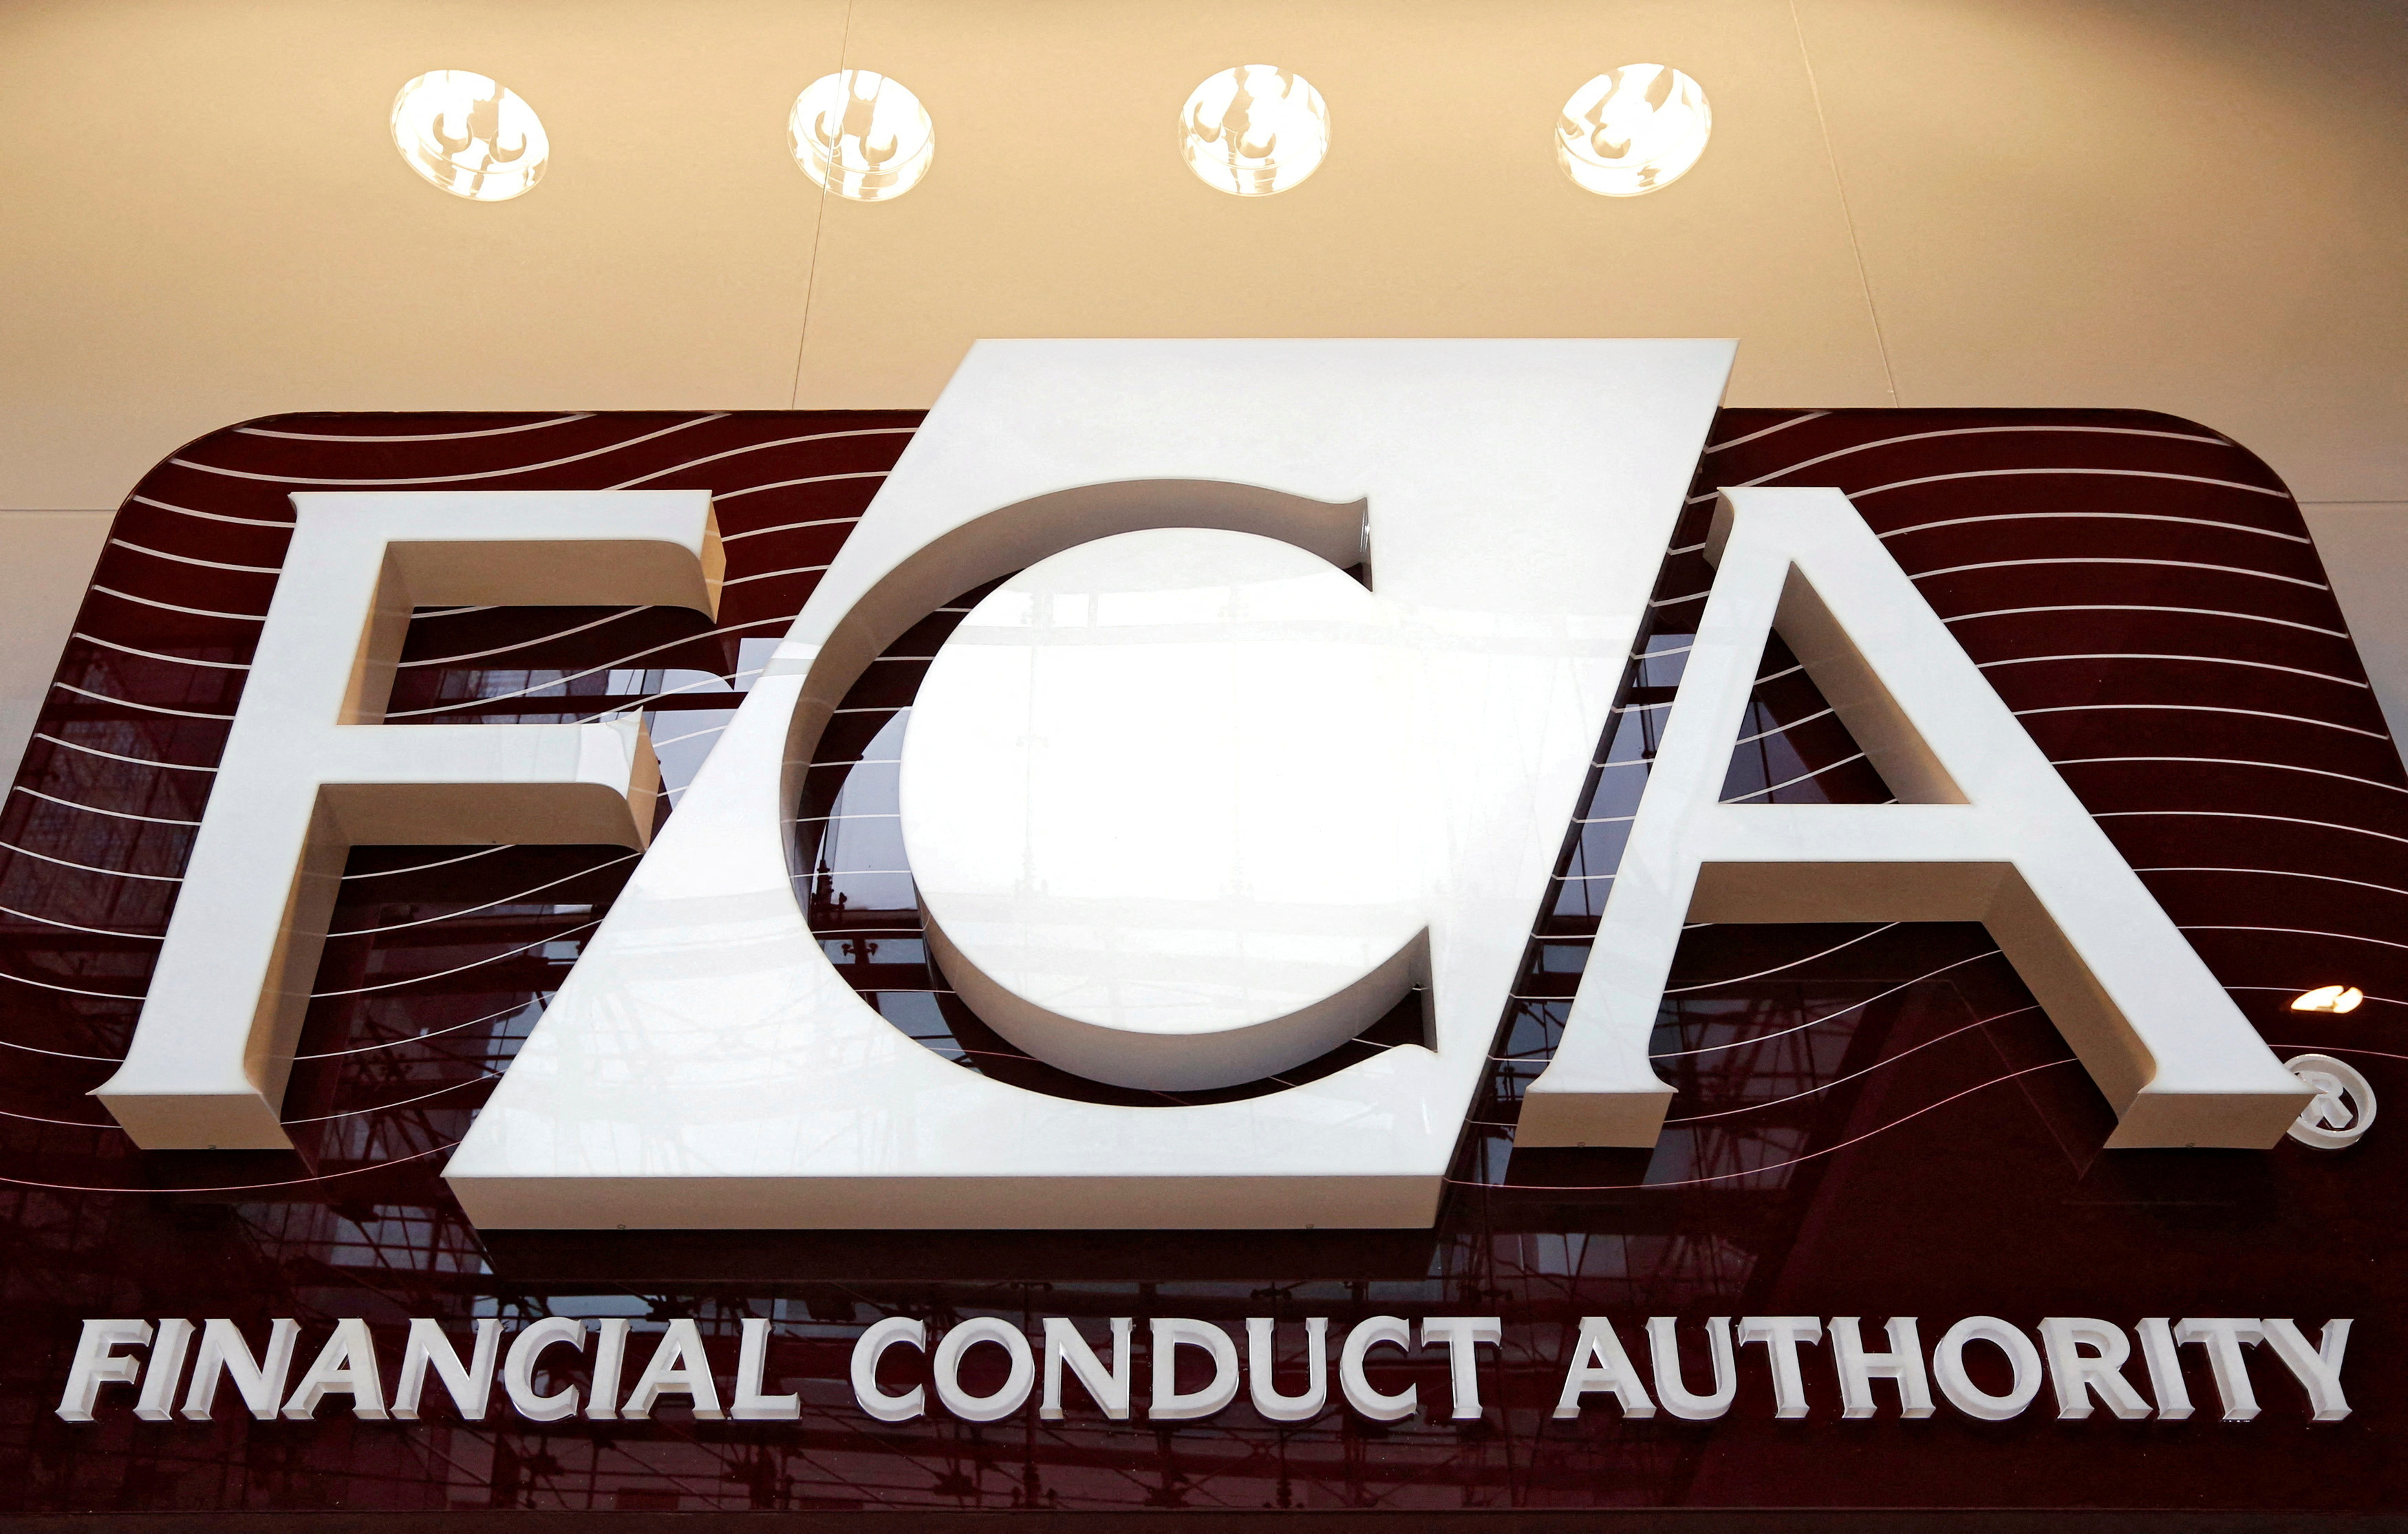 The logo of the Financial Conduct Authority is seen at the agency's headquarters in London, Britain